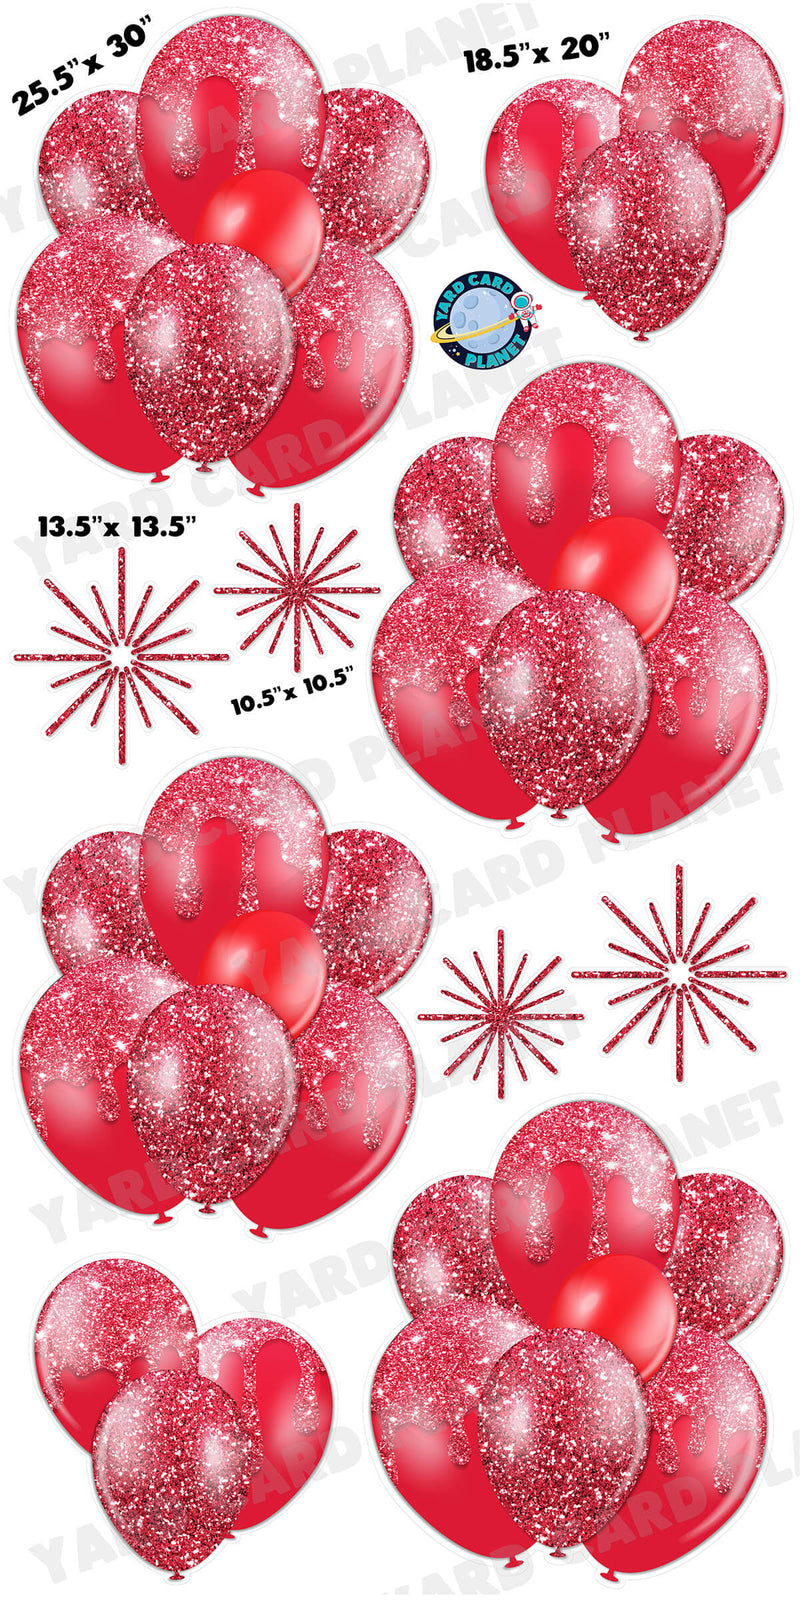 Red Glitter Balloon Bouquets and Starbursts Yard Card Set